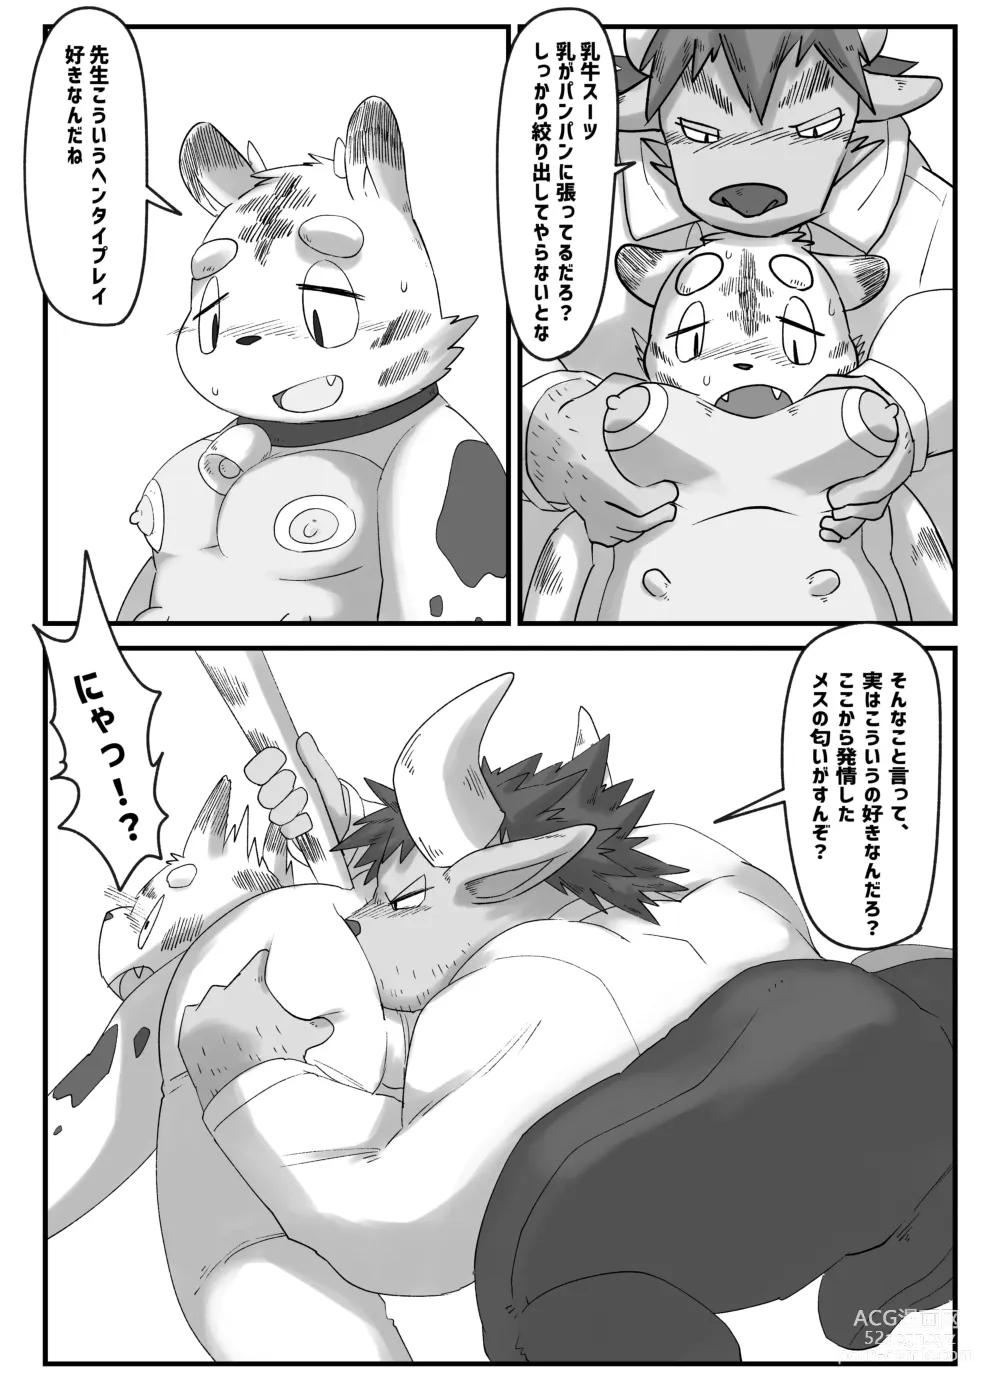 Page 9 of doujinshi Muscular Bull Teacher & Chubby Tiger Student 4